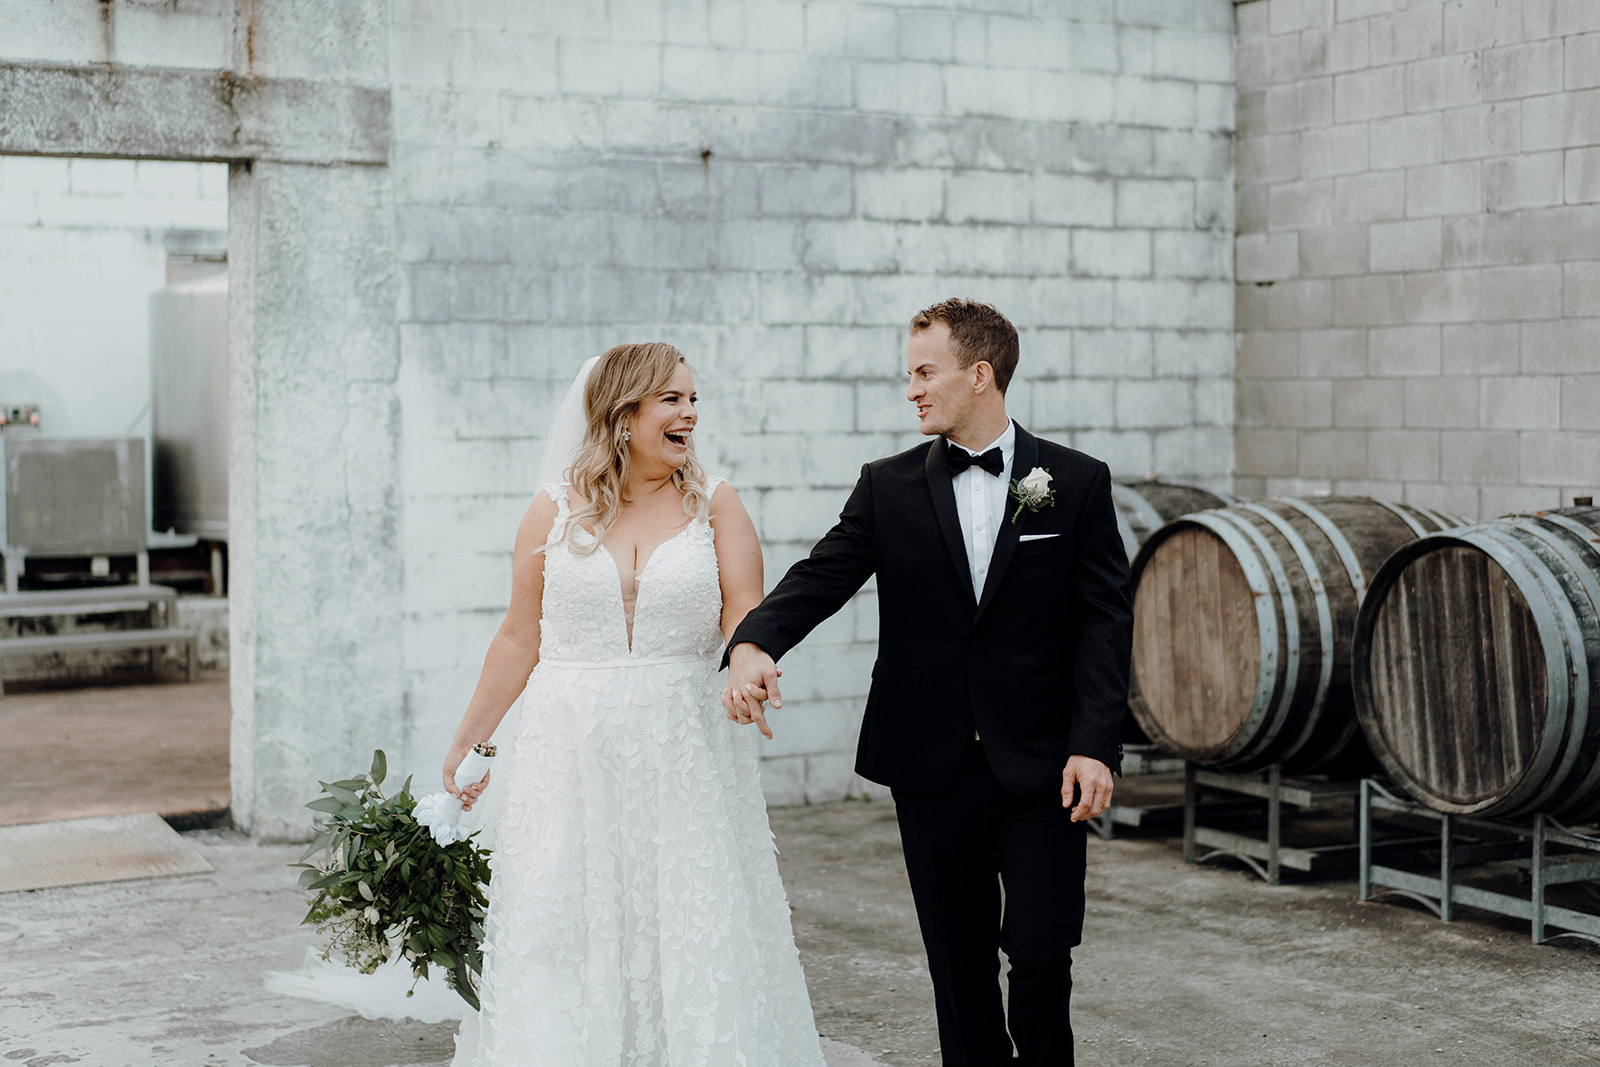 A bride and groom walking towards the photographer during a wedding photoshoot at Vilagrads Winery, being photographed by Haley Adele Photography